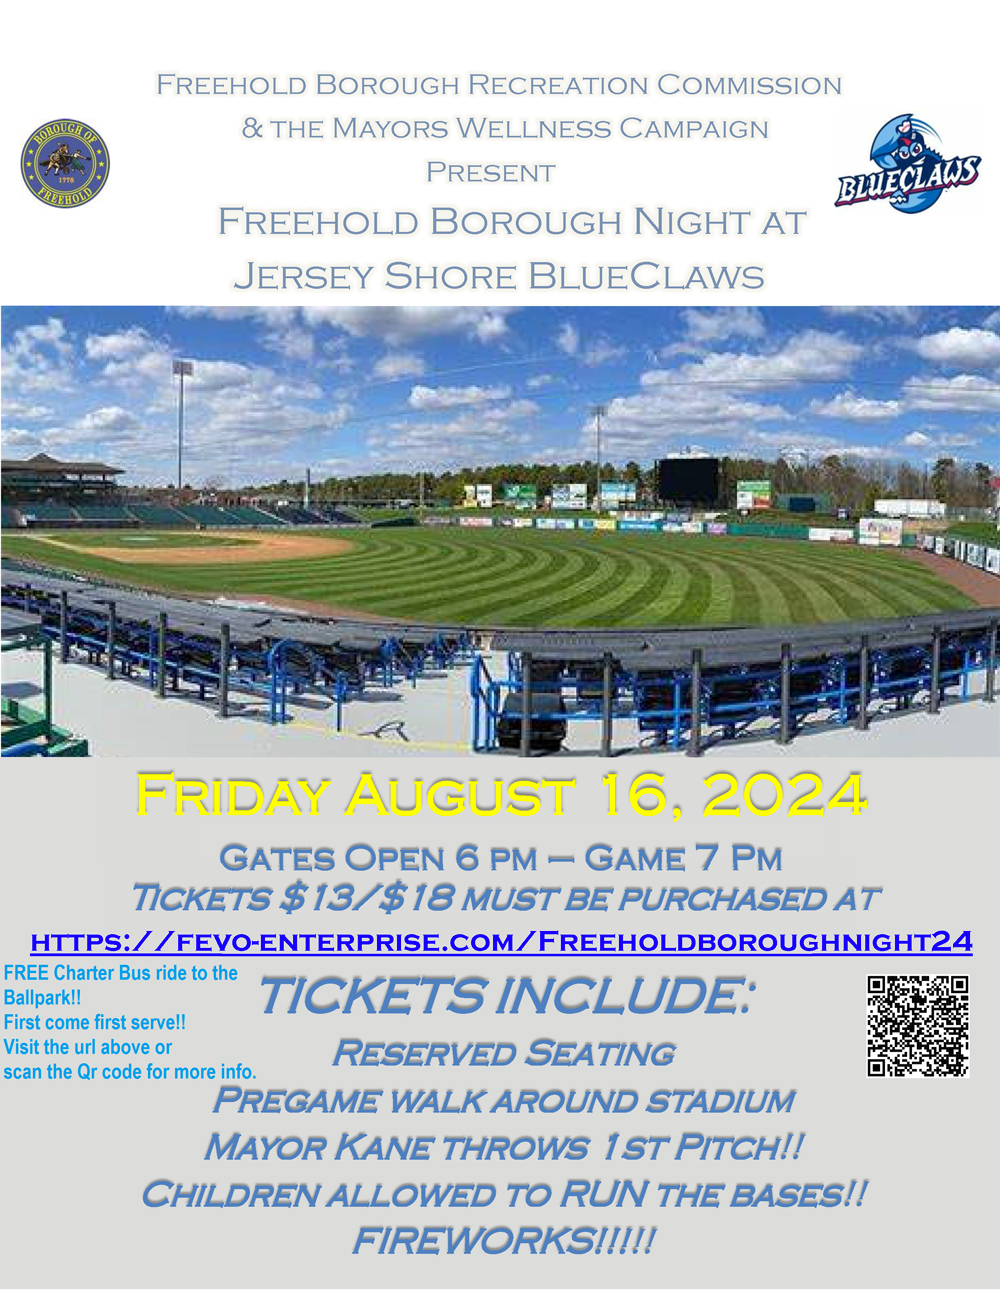 Blue Claws flyer English language. Click to open an OCR scanned version of this flyer. Event is Friday, August 16, 2024. Gates open at 6PM, game starts at 7PM. Tickets are $13, an additional package with food vouchers can be bought for $5 more. 